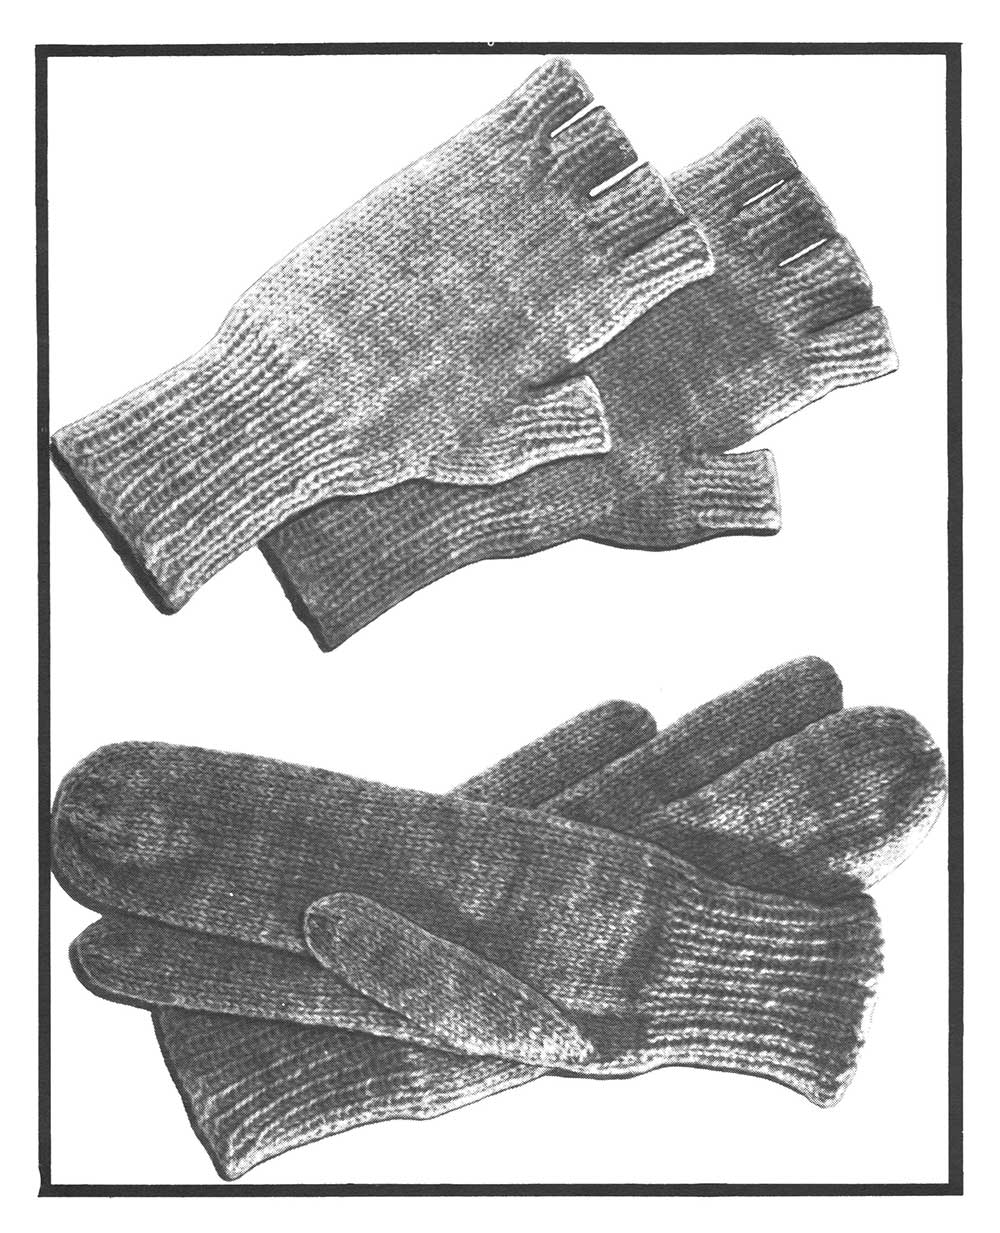 Hunting Mitts Pattern